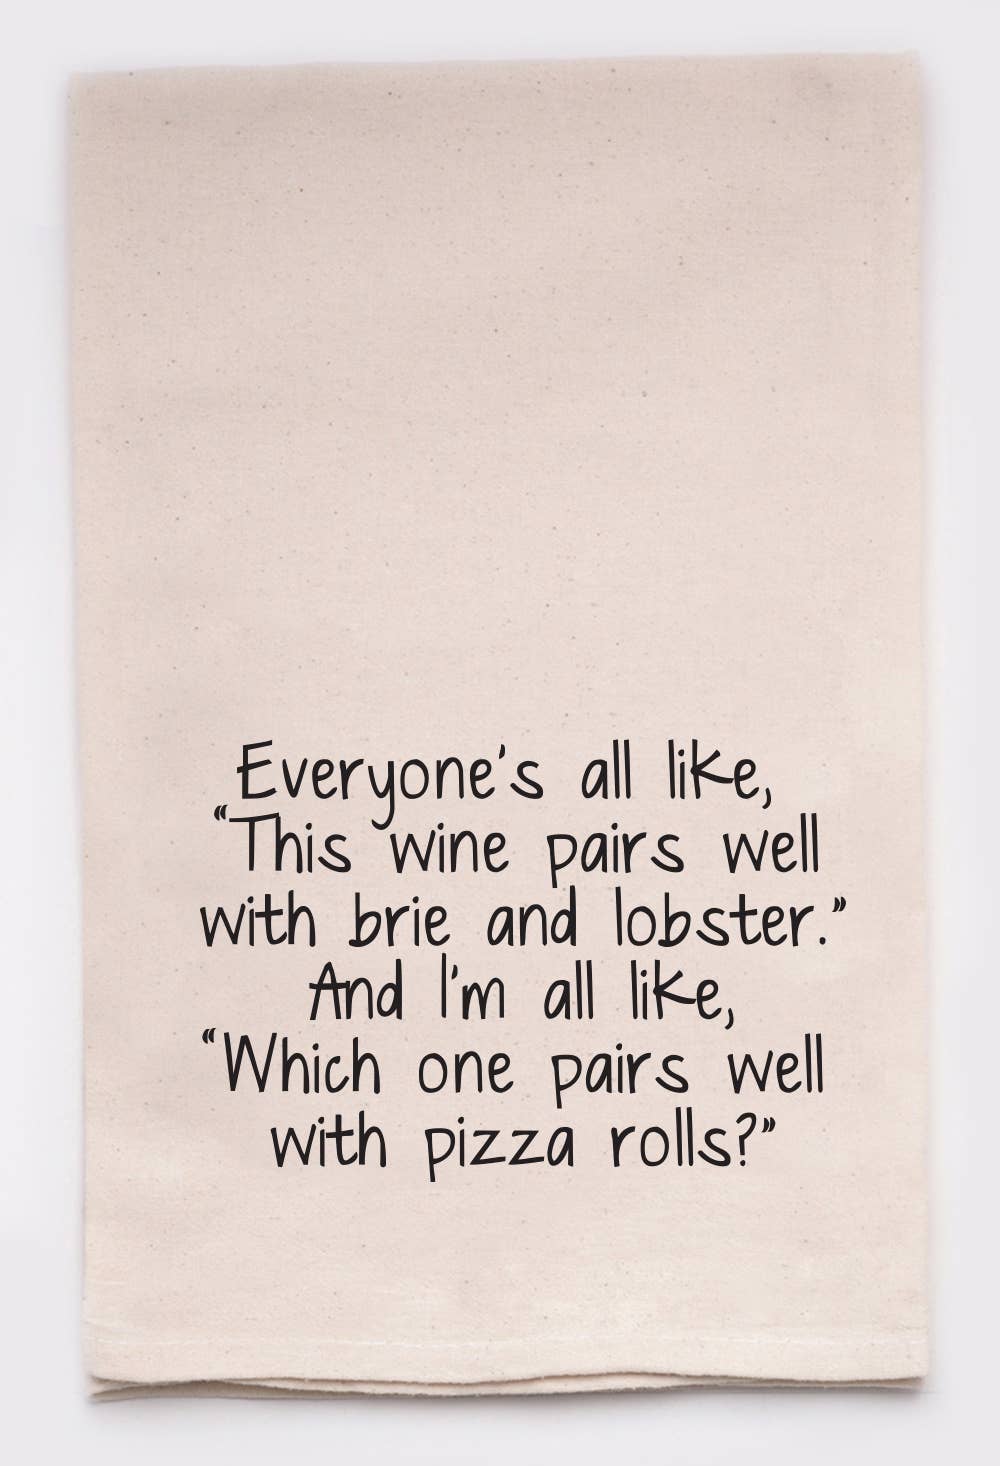 Tea Towel | Pizza Rolls pair well with wine